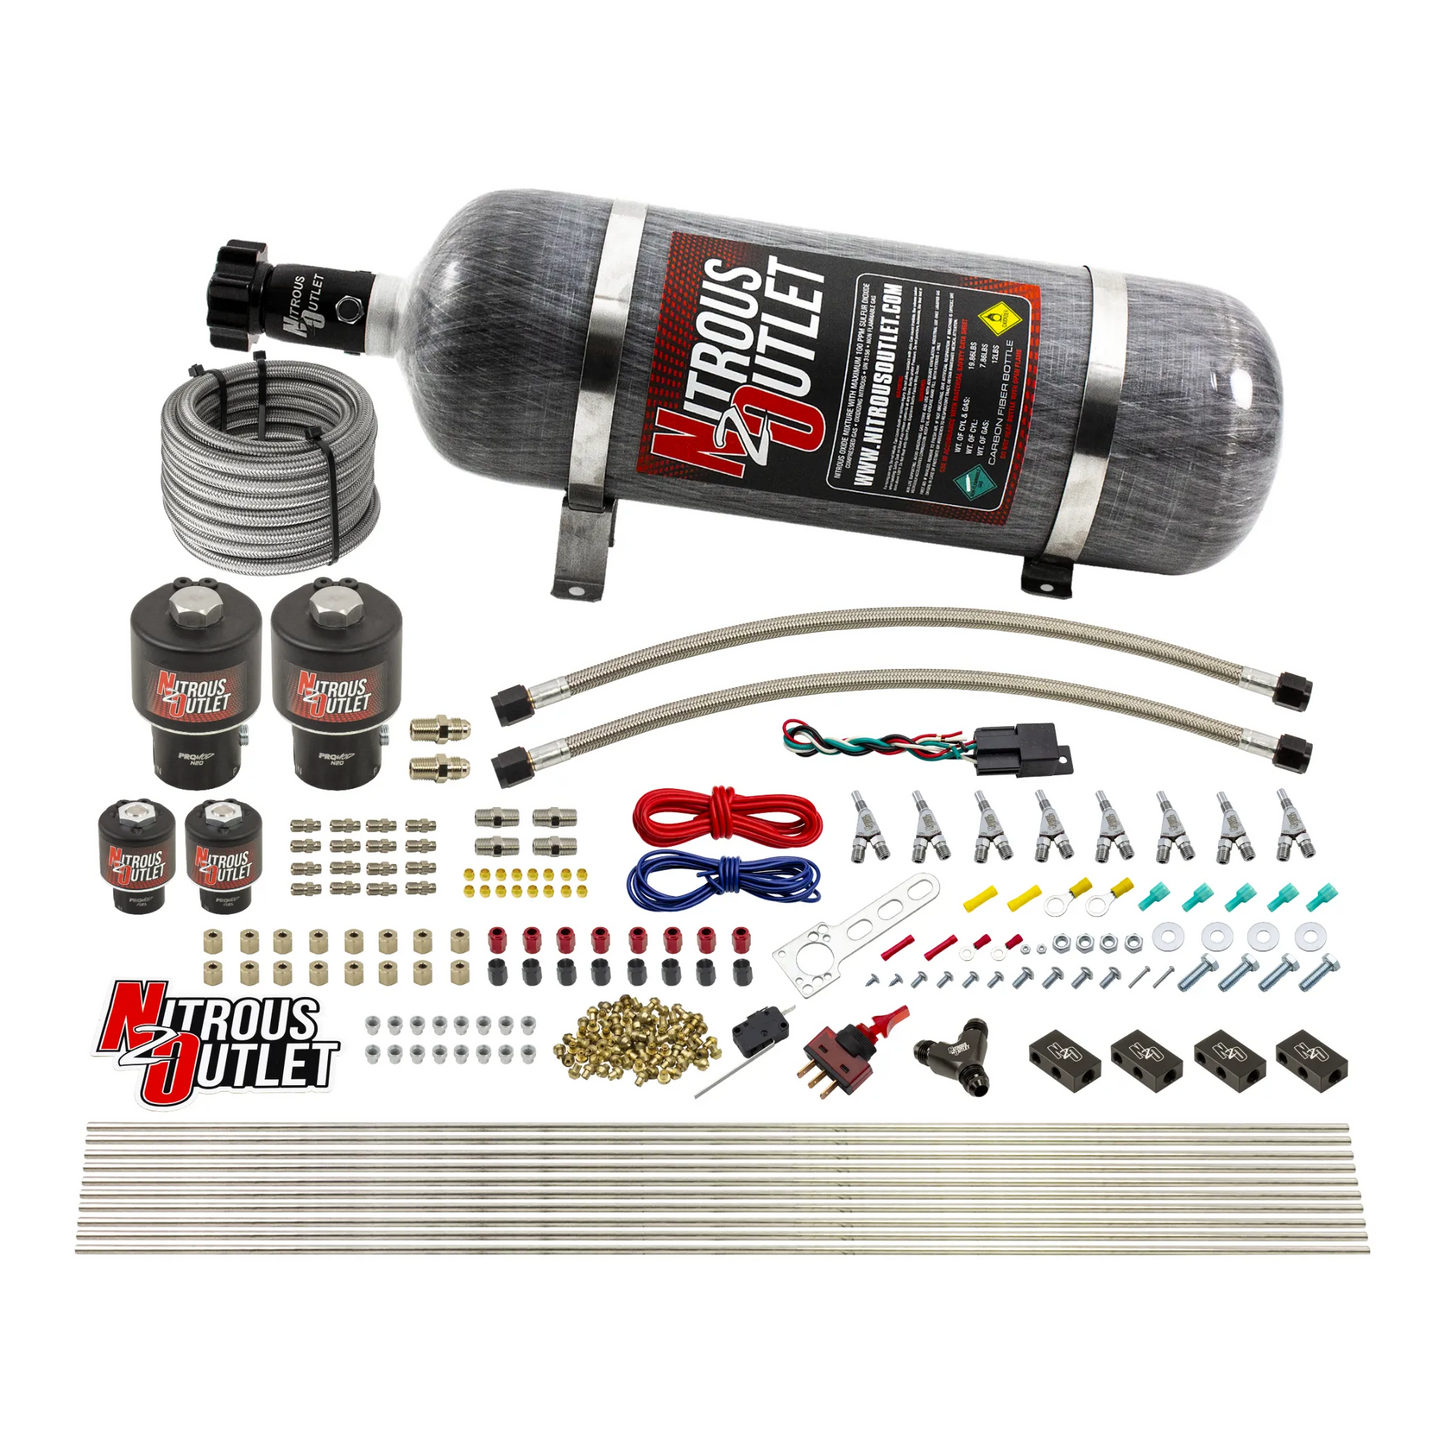 8 Cylinder Single Stage Direct Port Nitrous System - .178 Nitrous/.177 Fuel Solenoids - Straight Blow Through Nozzles